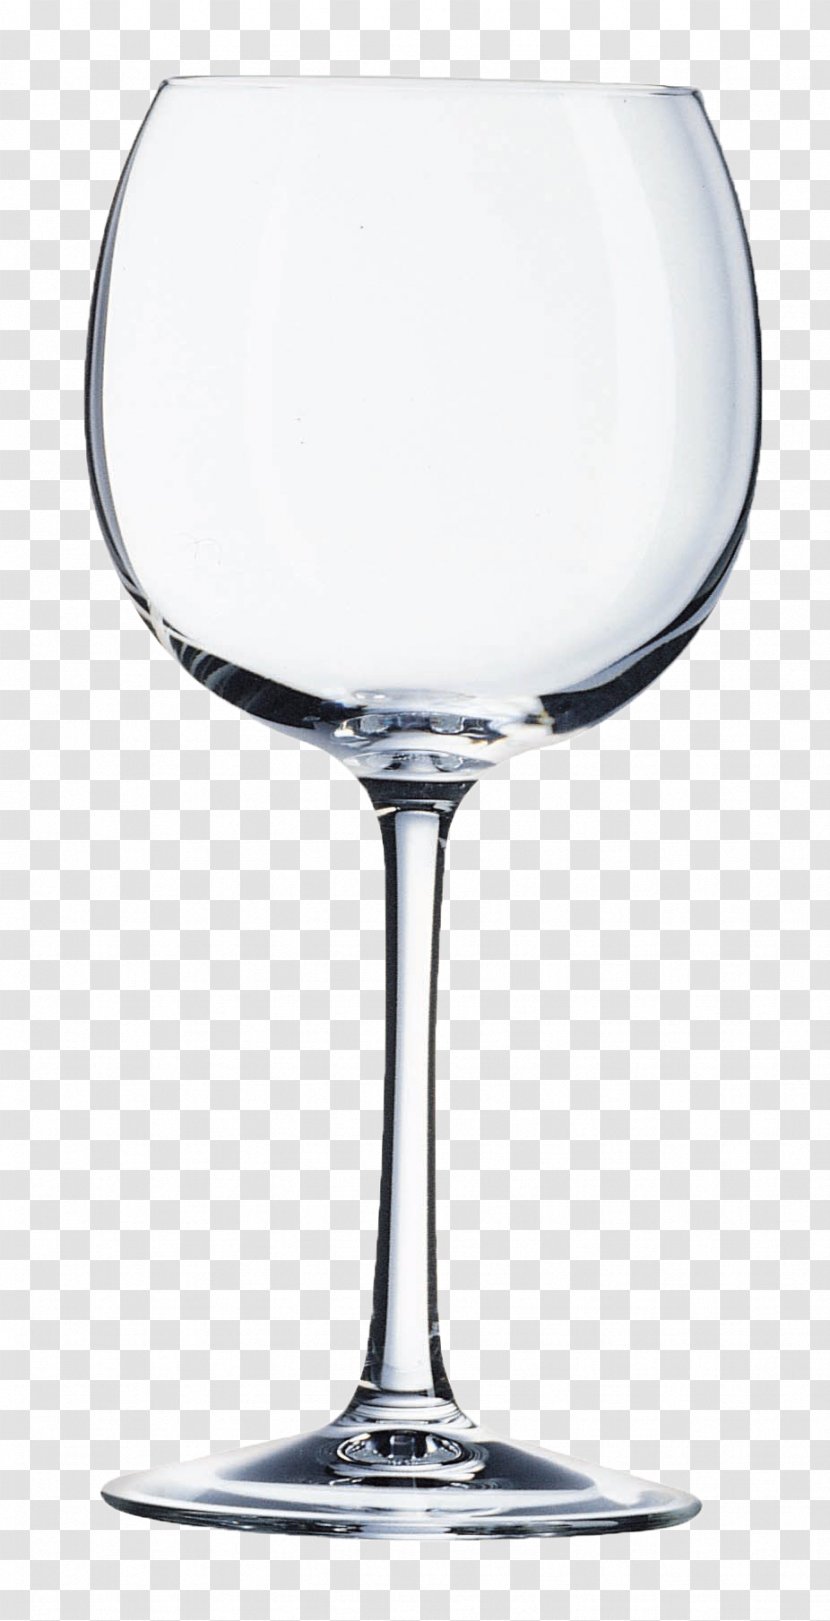 Wine Glass Champagne Snifter Martini Transparent PNG